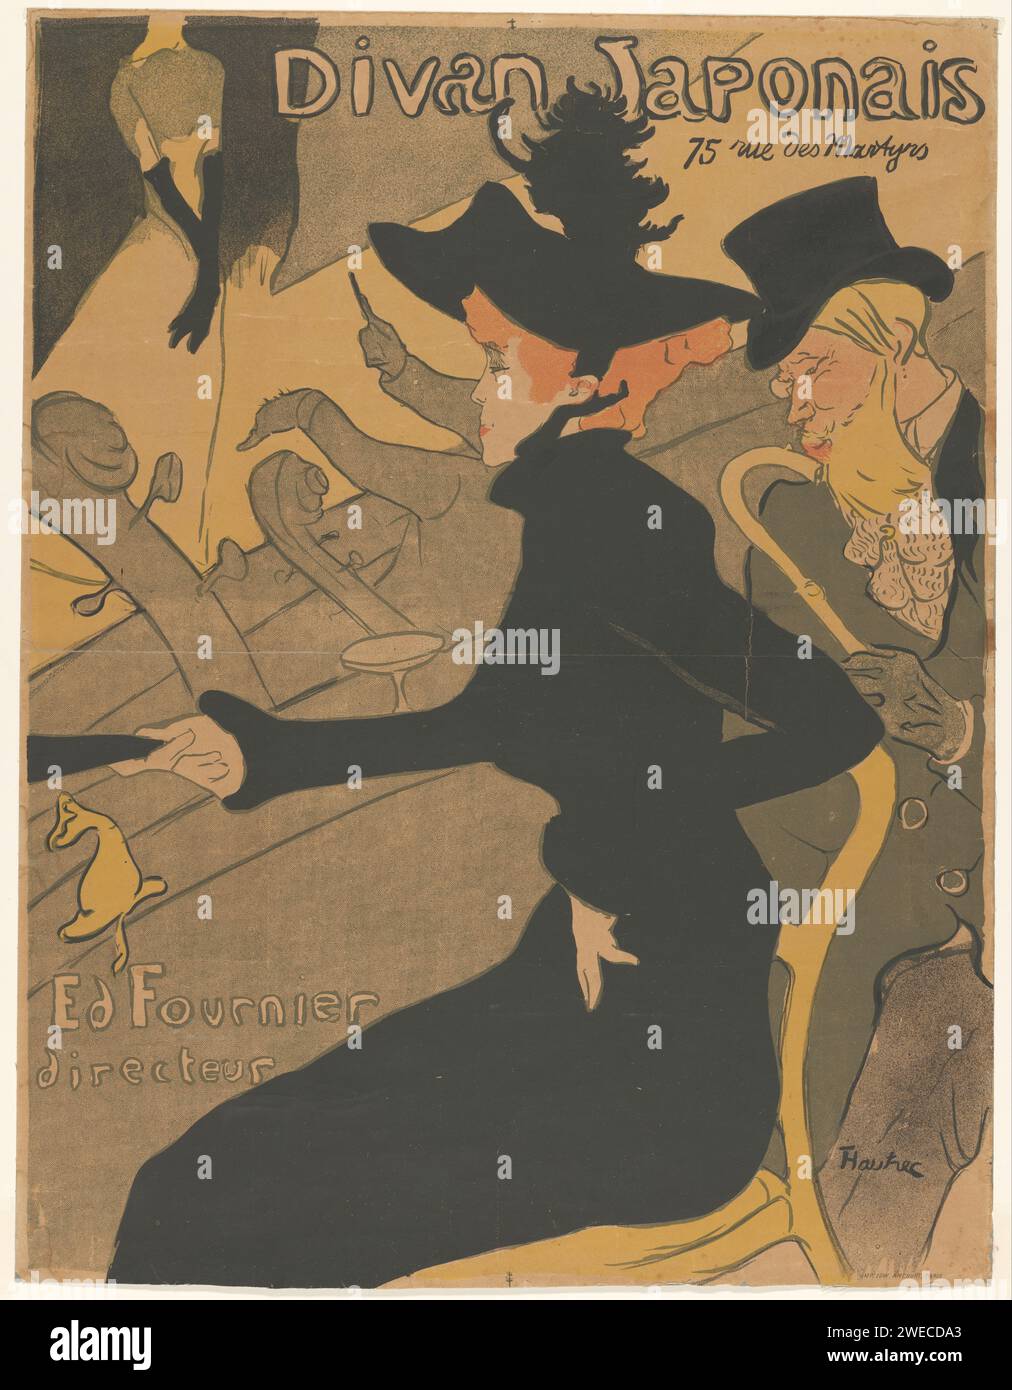 Woman and Man in the audience at a singing performance, Henri de Toulouse-Lautrec, 1893 poster. print Poster for promotion of the Parisian café Chantant Divan Japonais. The woman depicted is dancer Jane Avril, the man next to her is writer Édouard Dujardin, the woman on stage is singer Yvette Guilbert. Paris paper  musician(s) accompanying singer(s) Paris Stock Photo